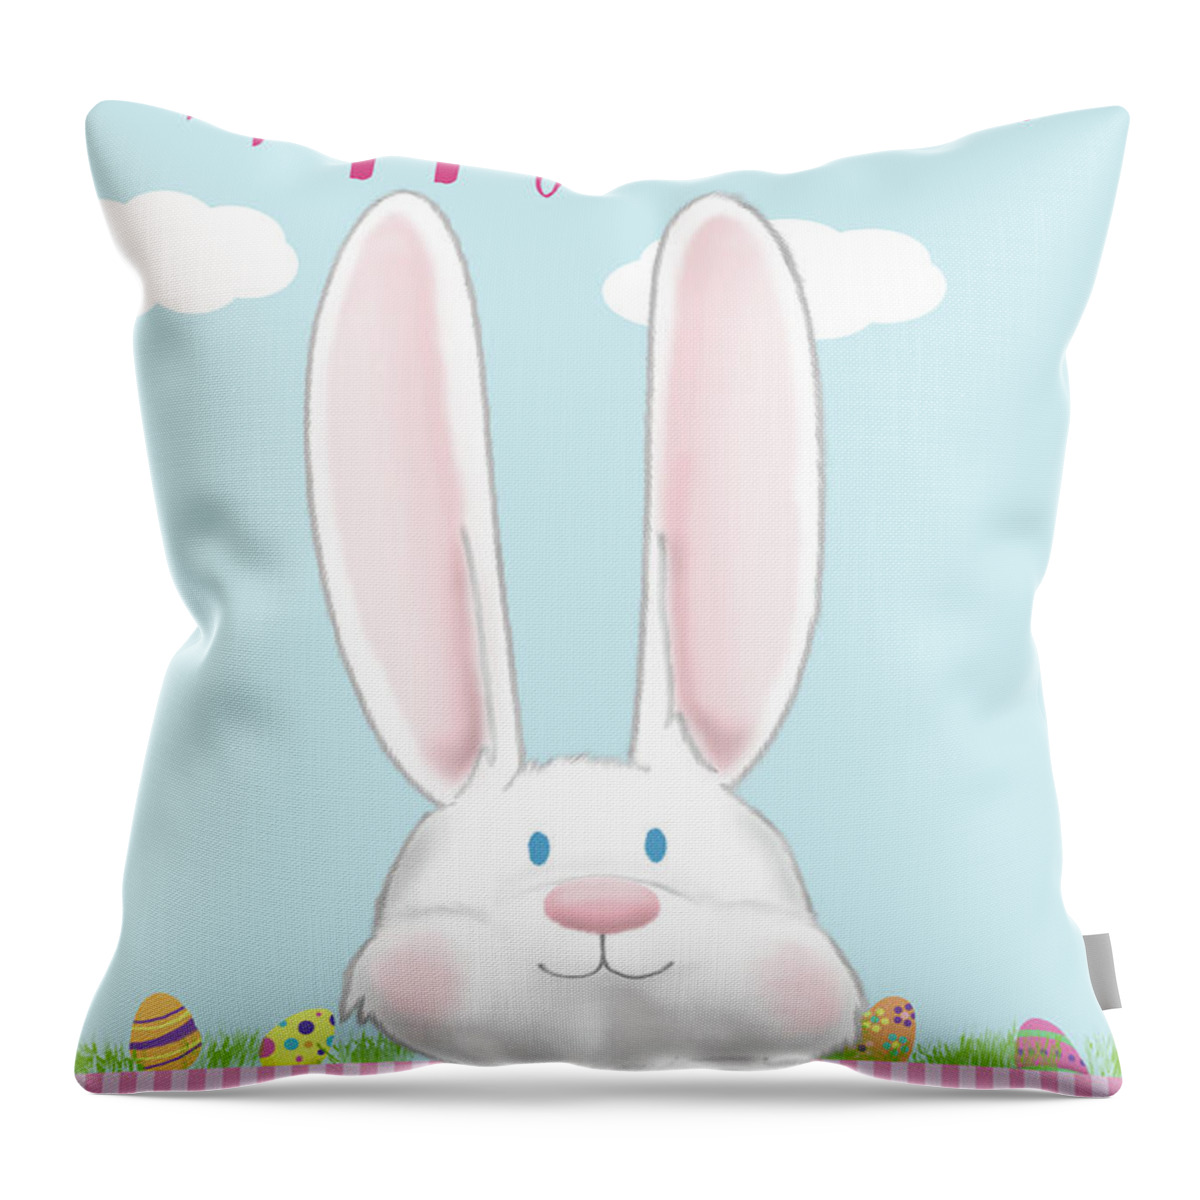 Happy Throw Pillow featuring the digital art Happy Easter I by Sd Graphics Studio